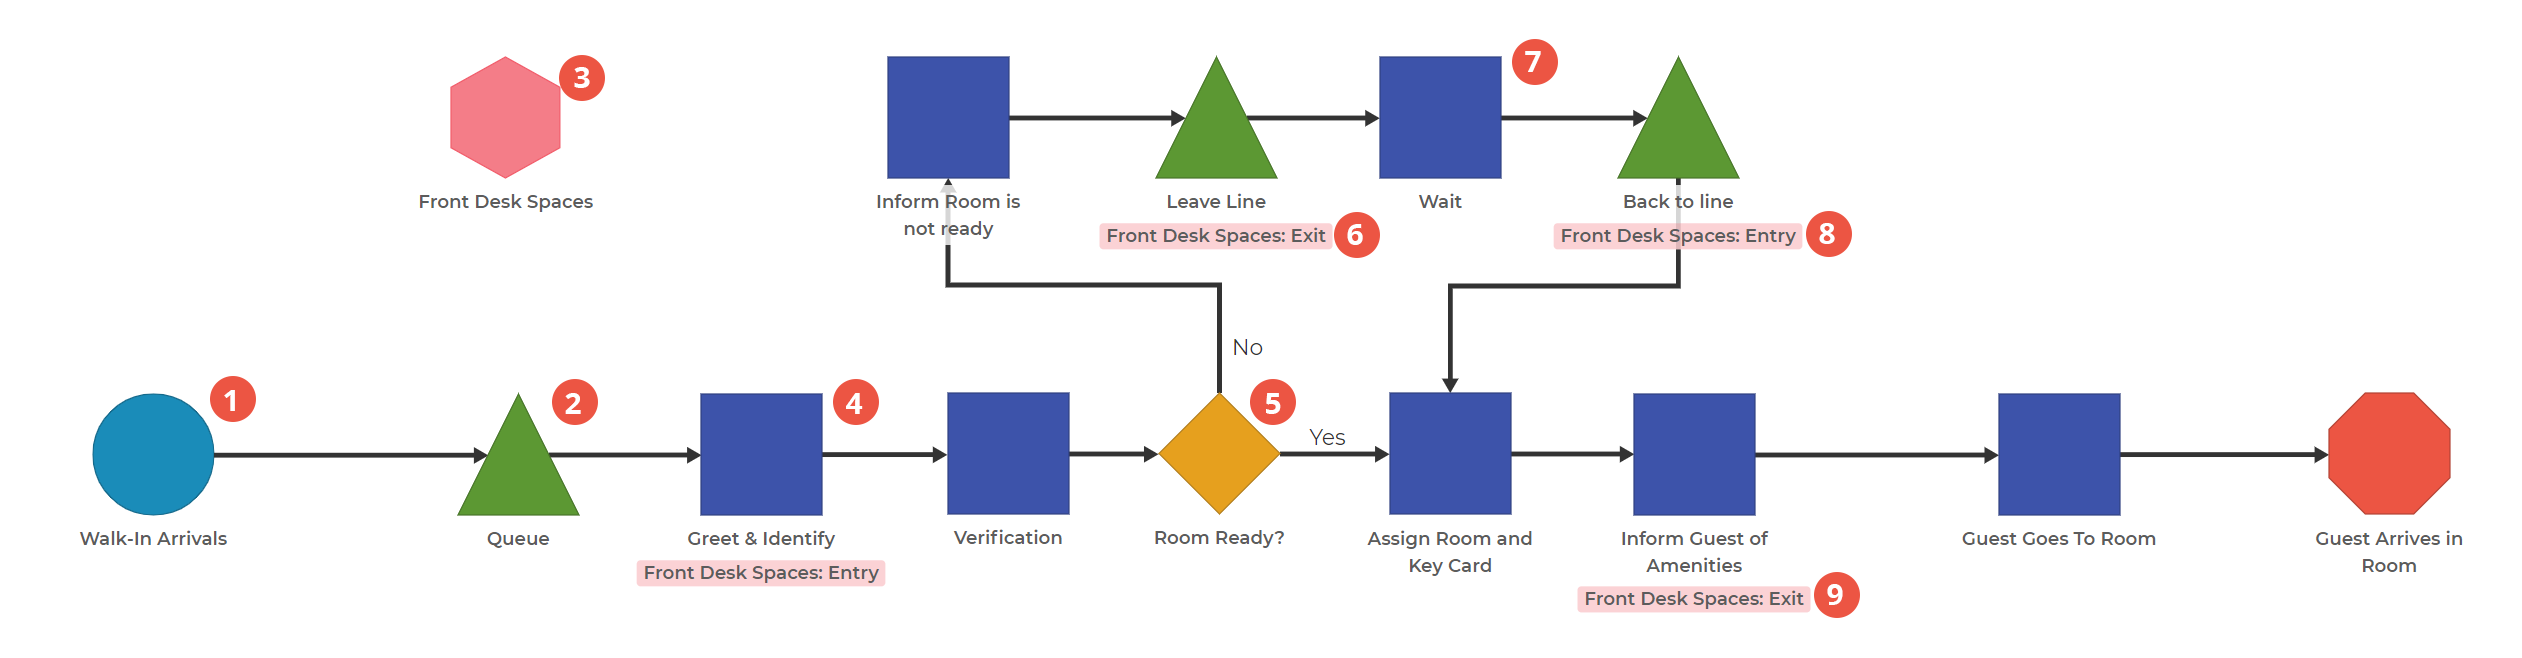 Process Playground Model showing a hotel check in process where there may be a delay if the room is not available